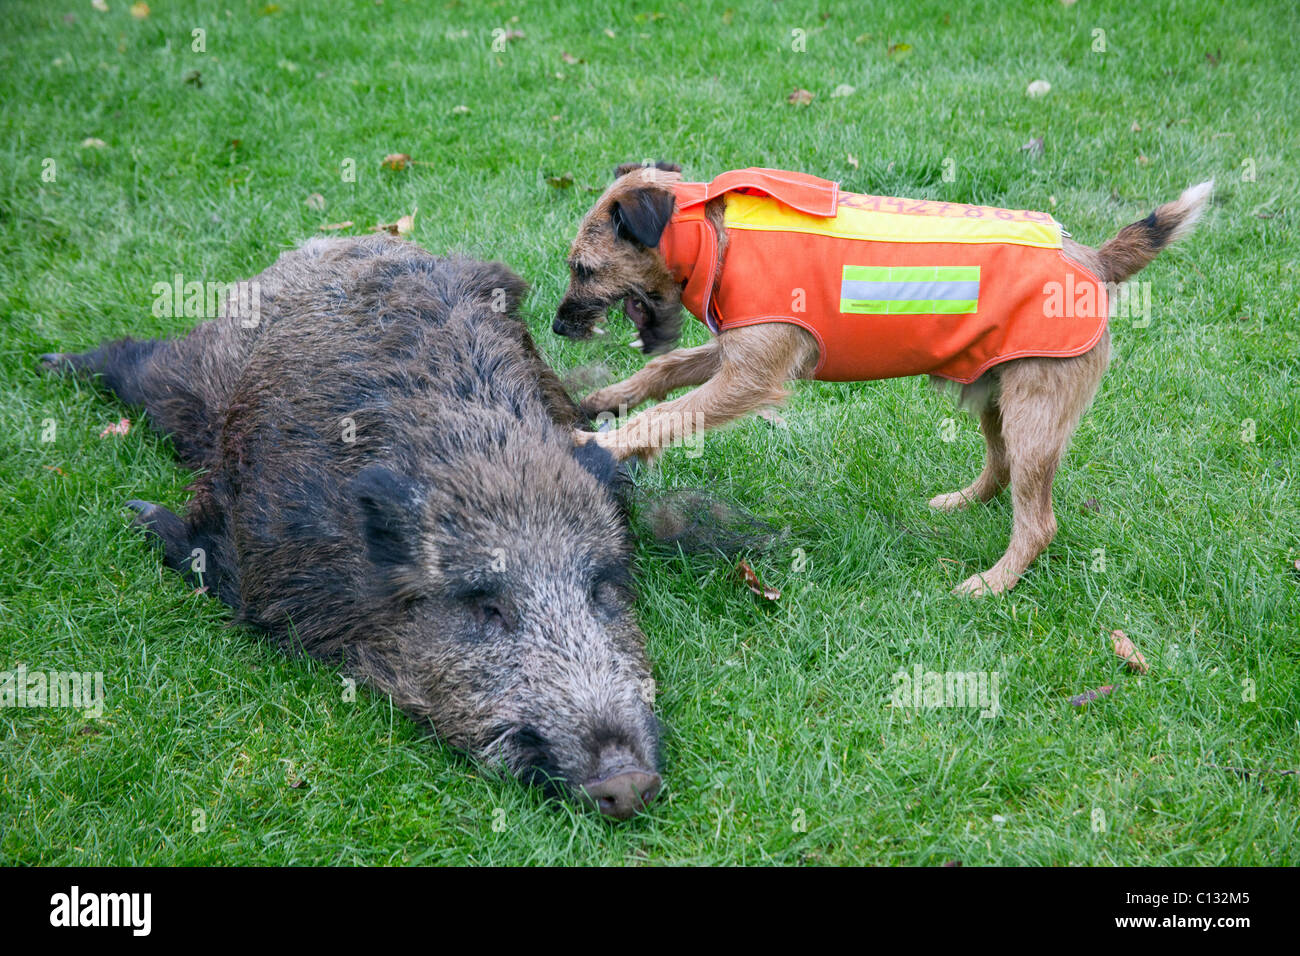 is hog hunting with dogs legal